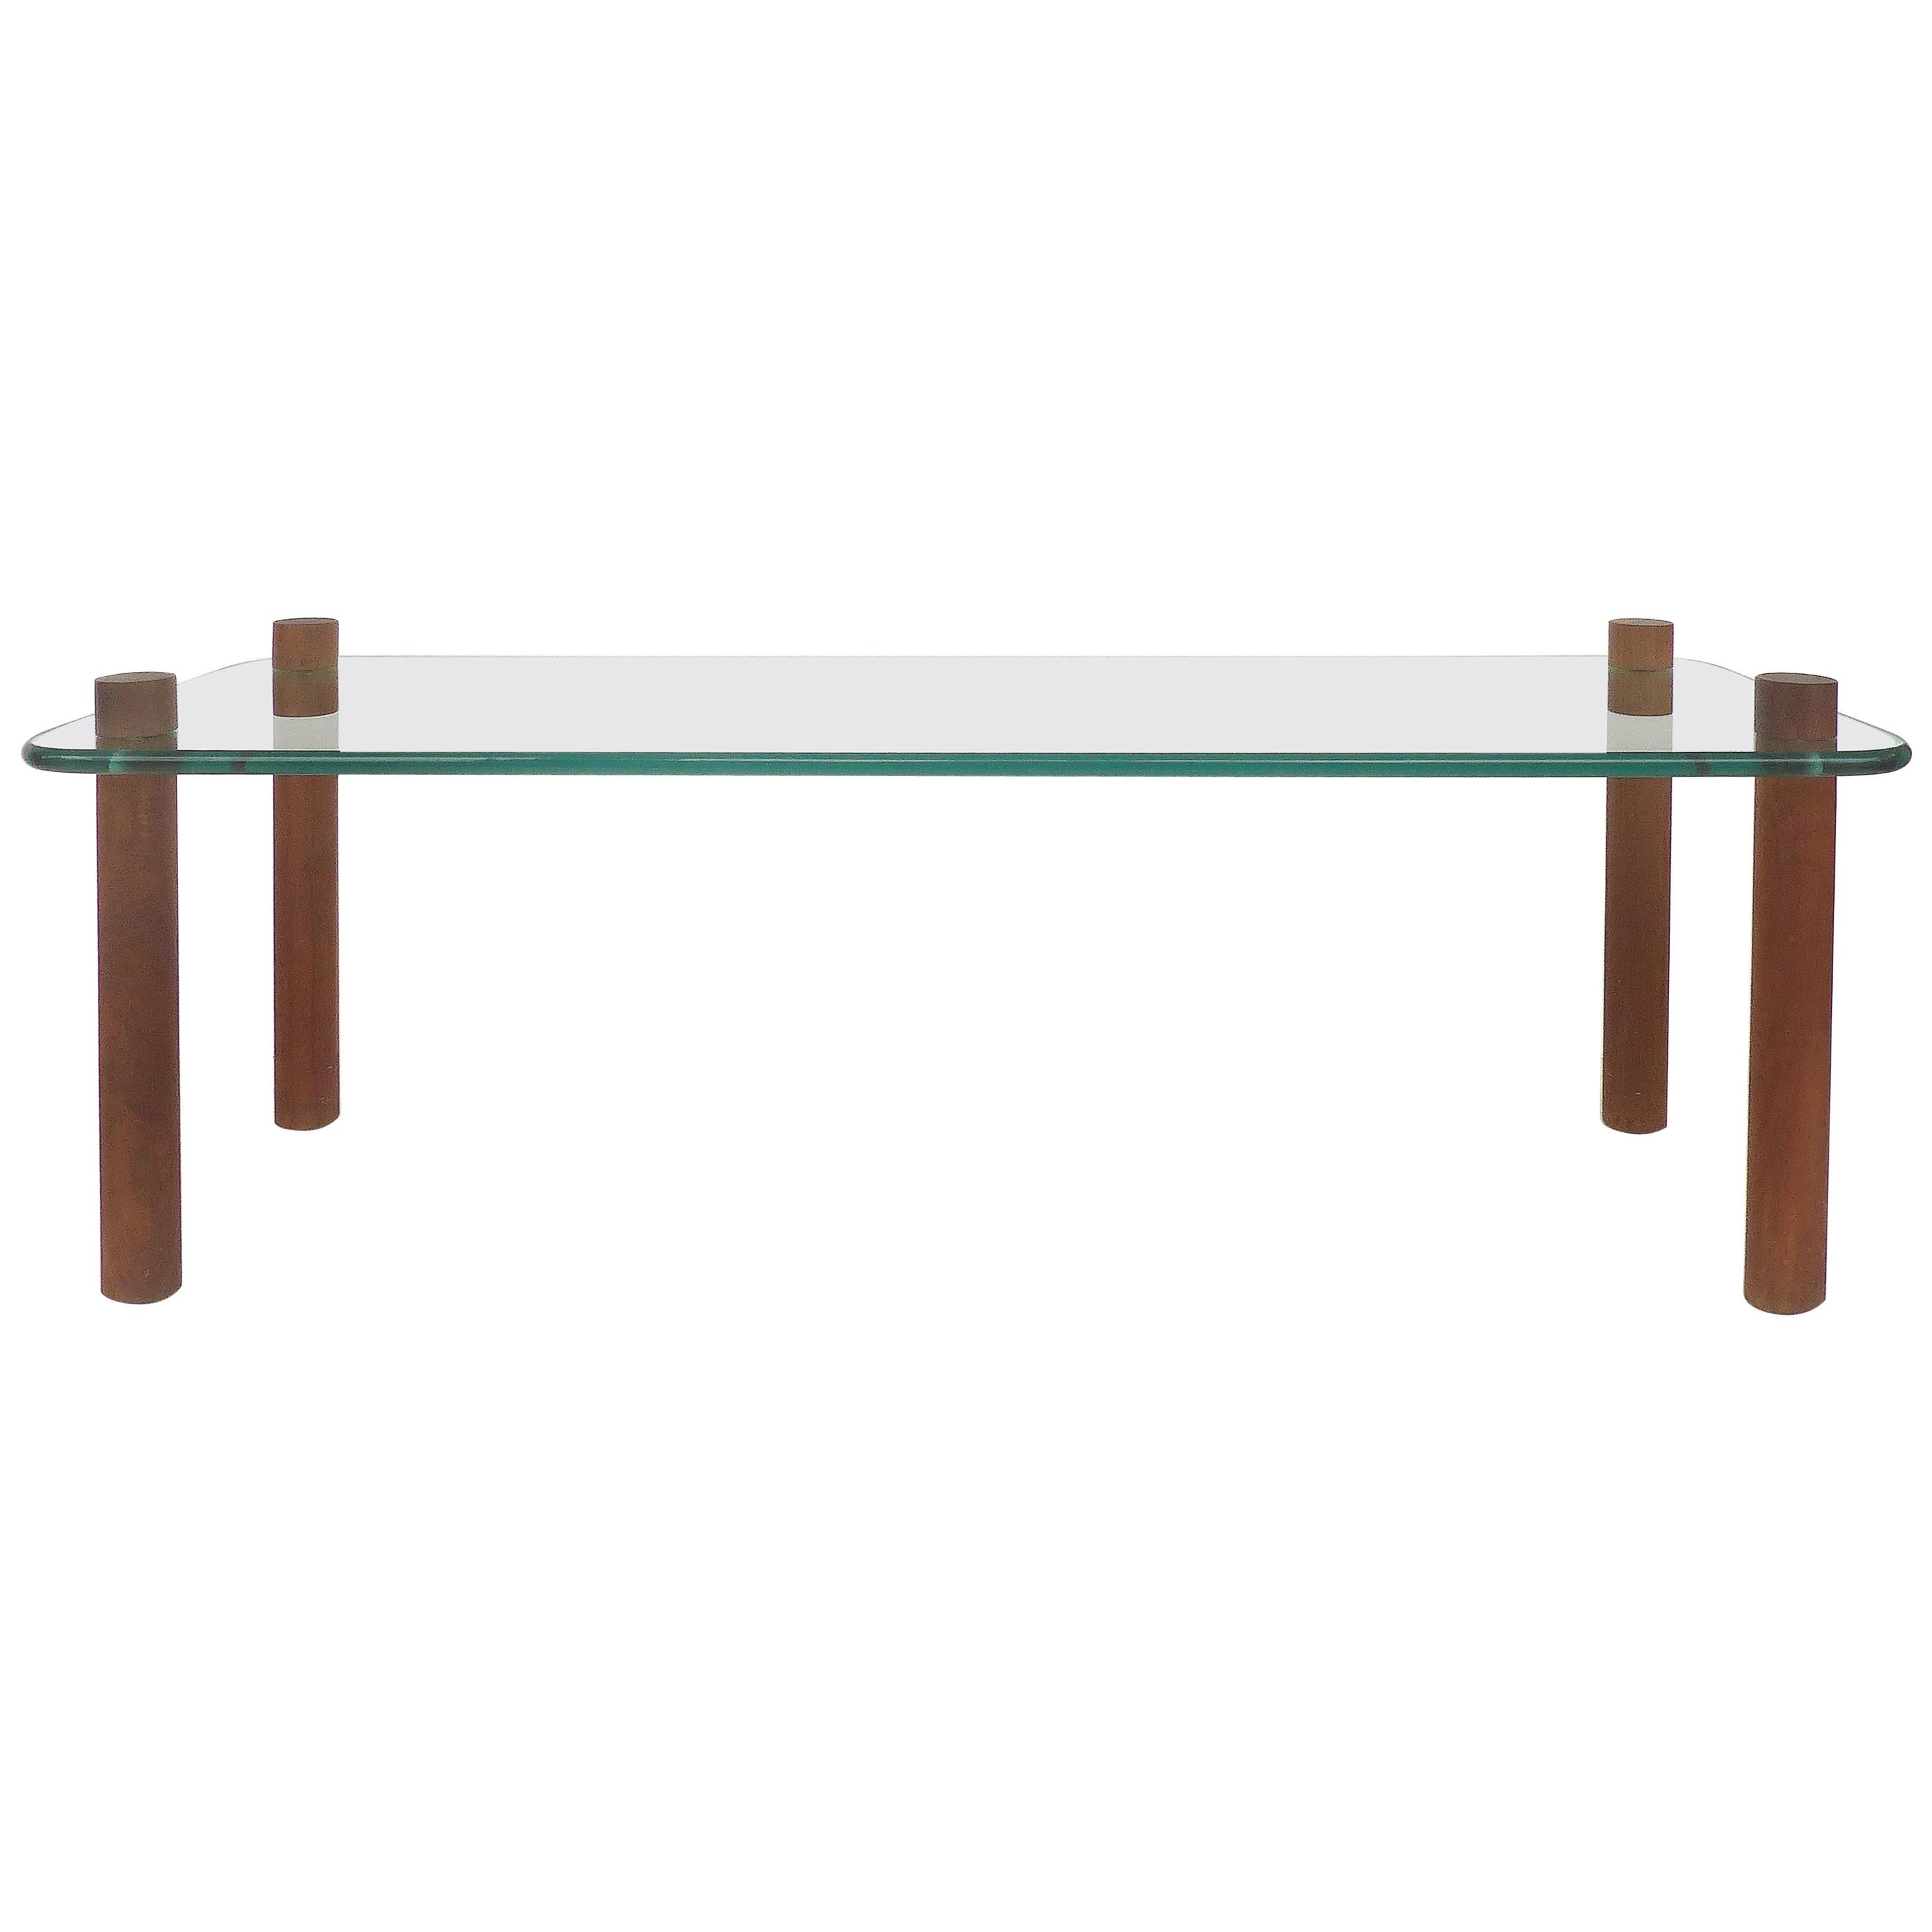 Adrian Pearsall Craft Associates Glass Coffee Table with Wood, circa 1960s